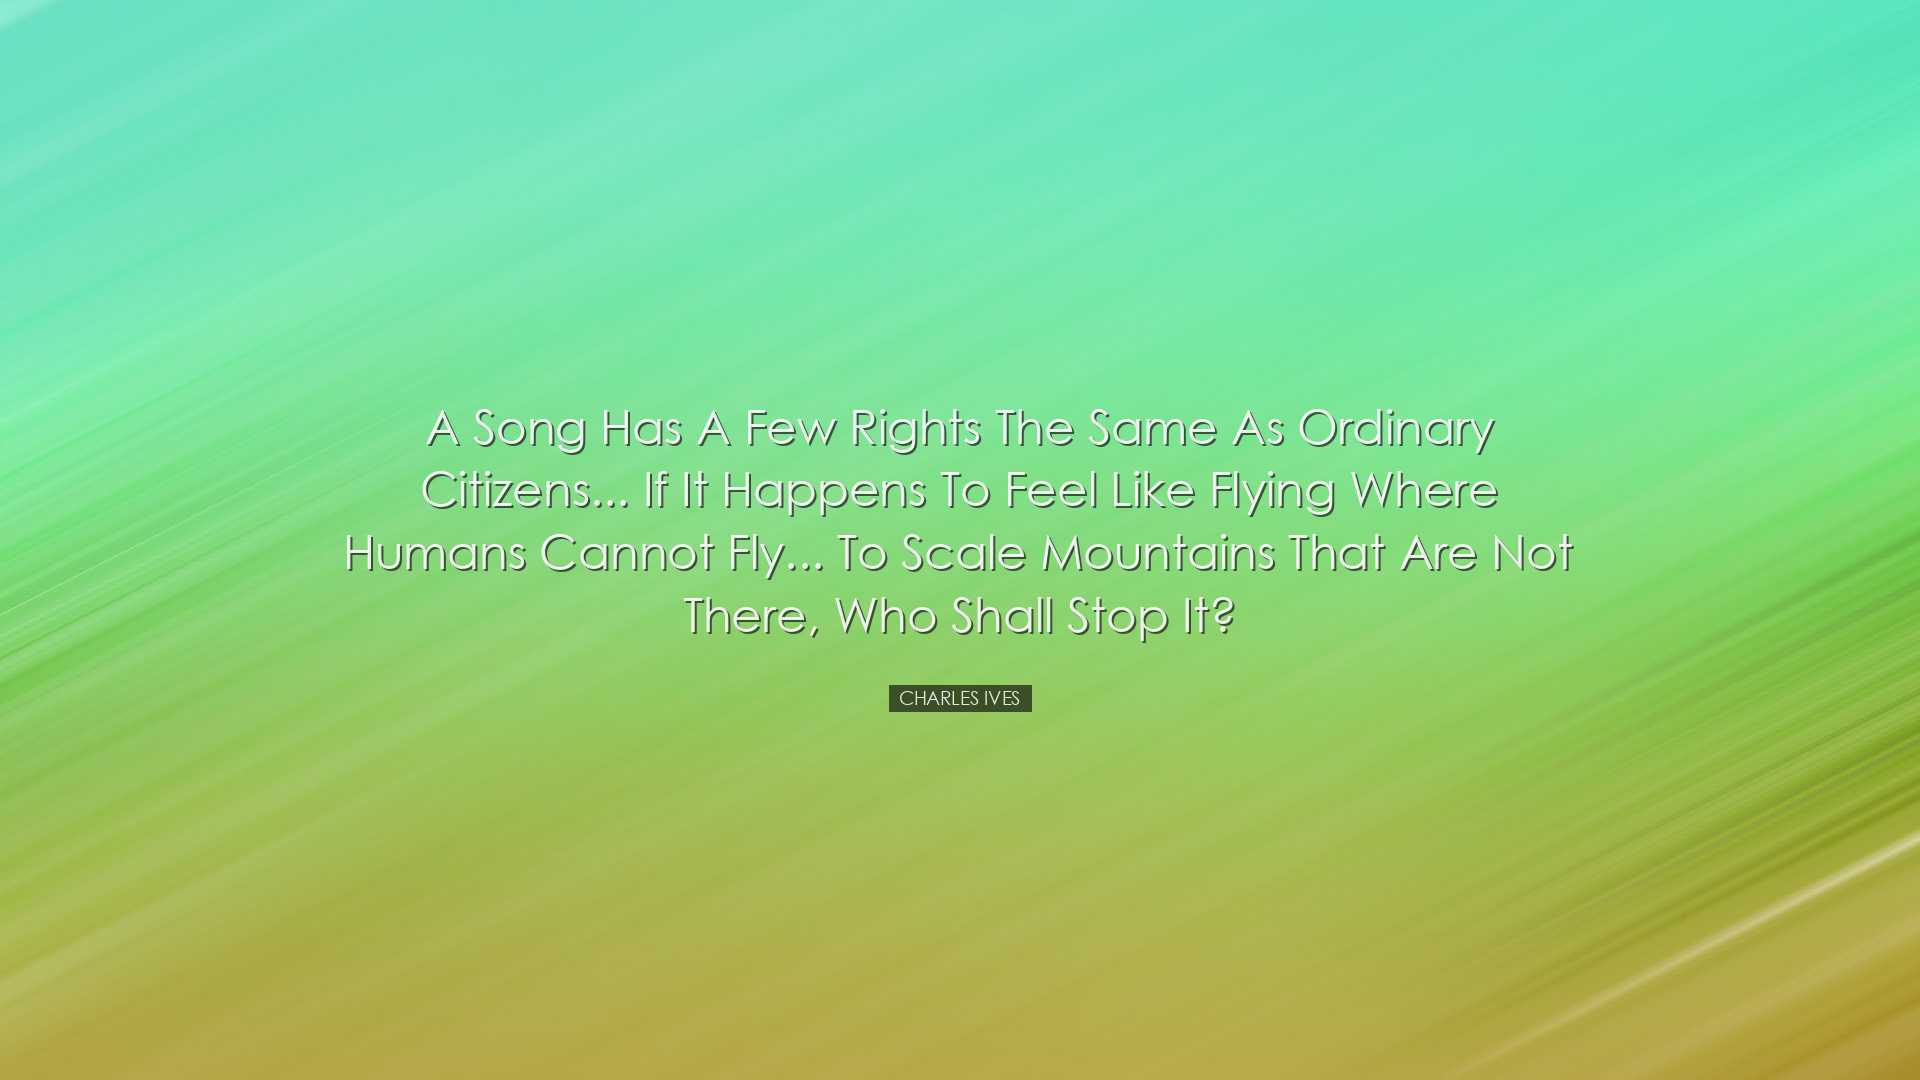 A song has a few rights the same as ordinary citizens... if it hap